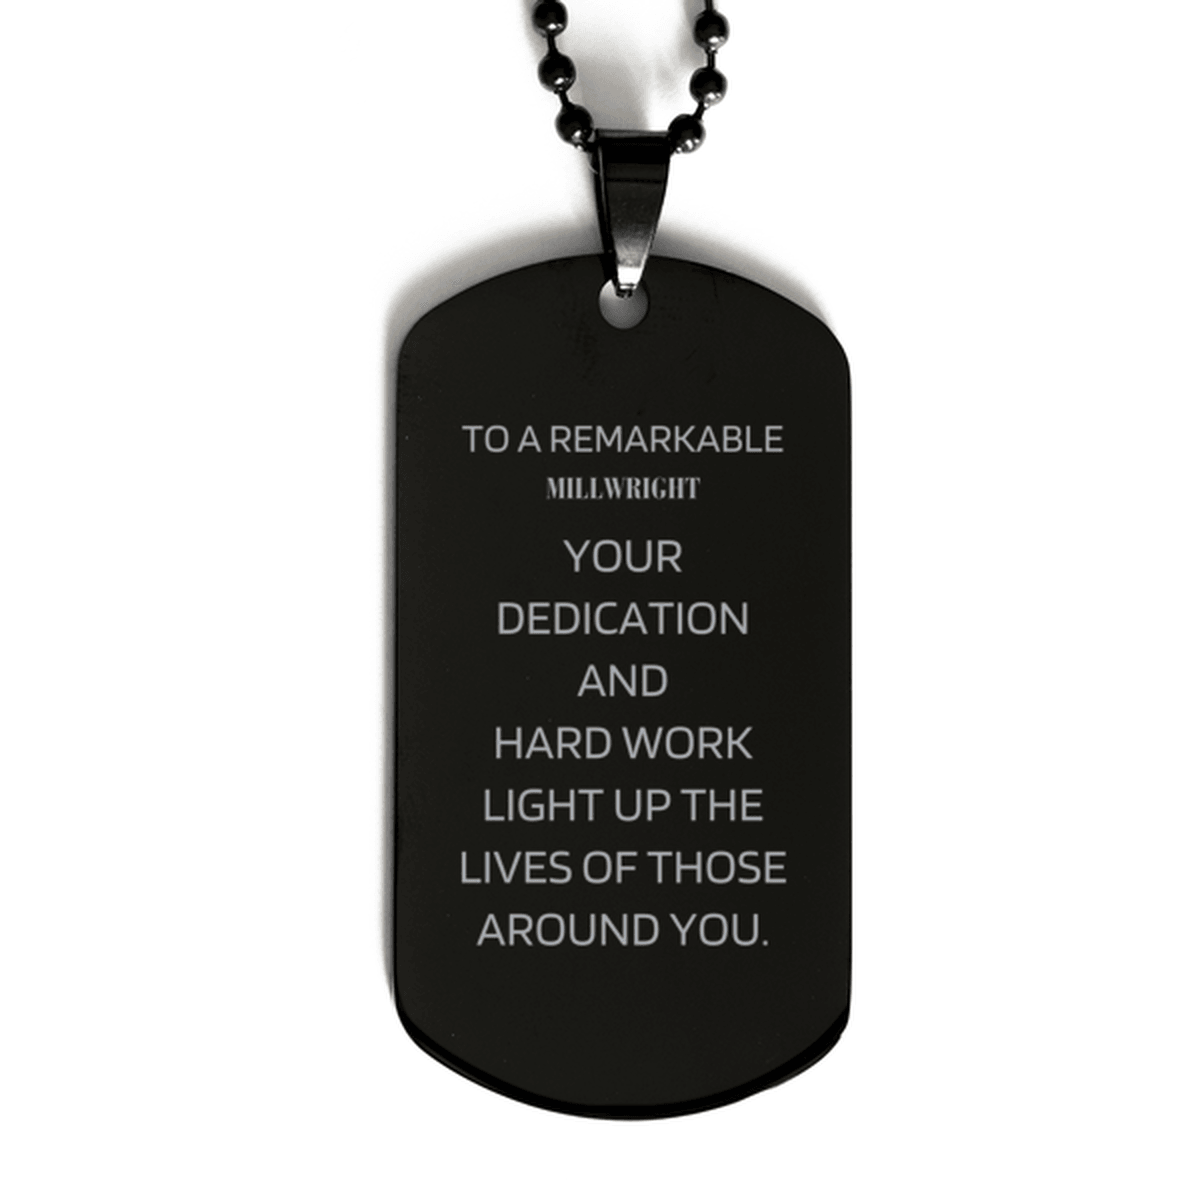 Remarkable Millwright Gifts, Your dedication and hard work, Inspirational Birthday Christmas Unique Black Dog Tag For Millwright, Coworkers, Men, Women, Friends - Mallard Moon Gift Shop